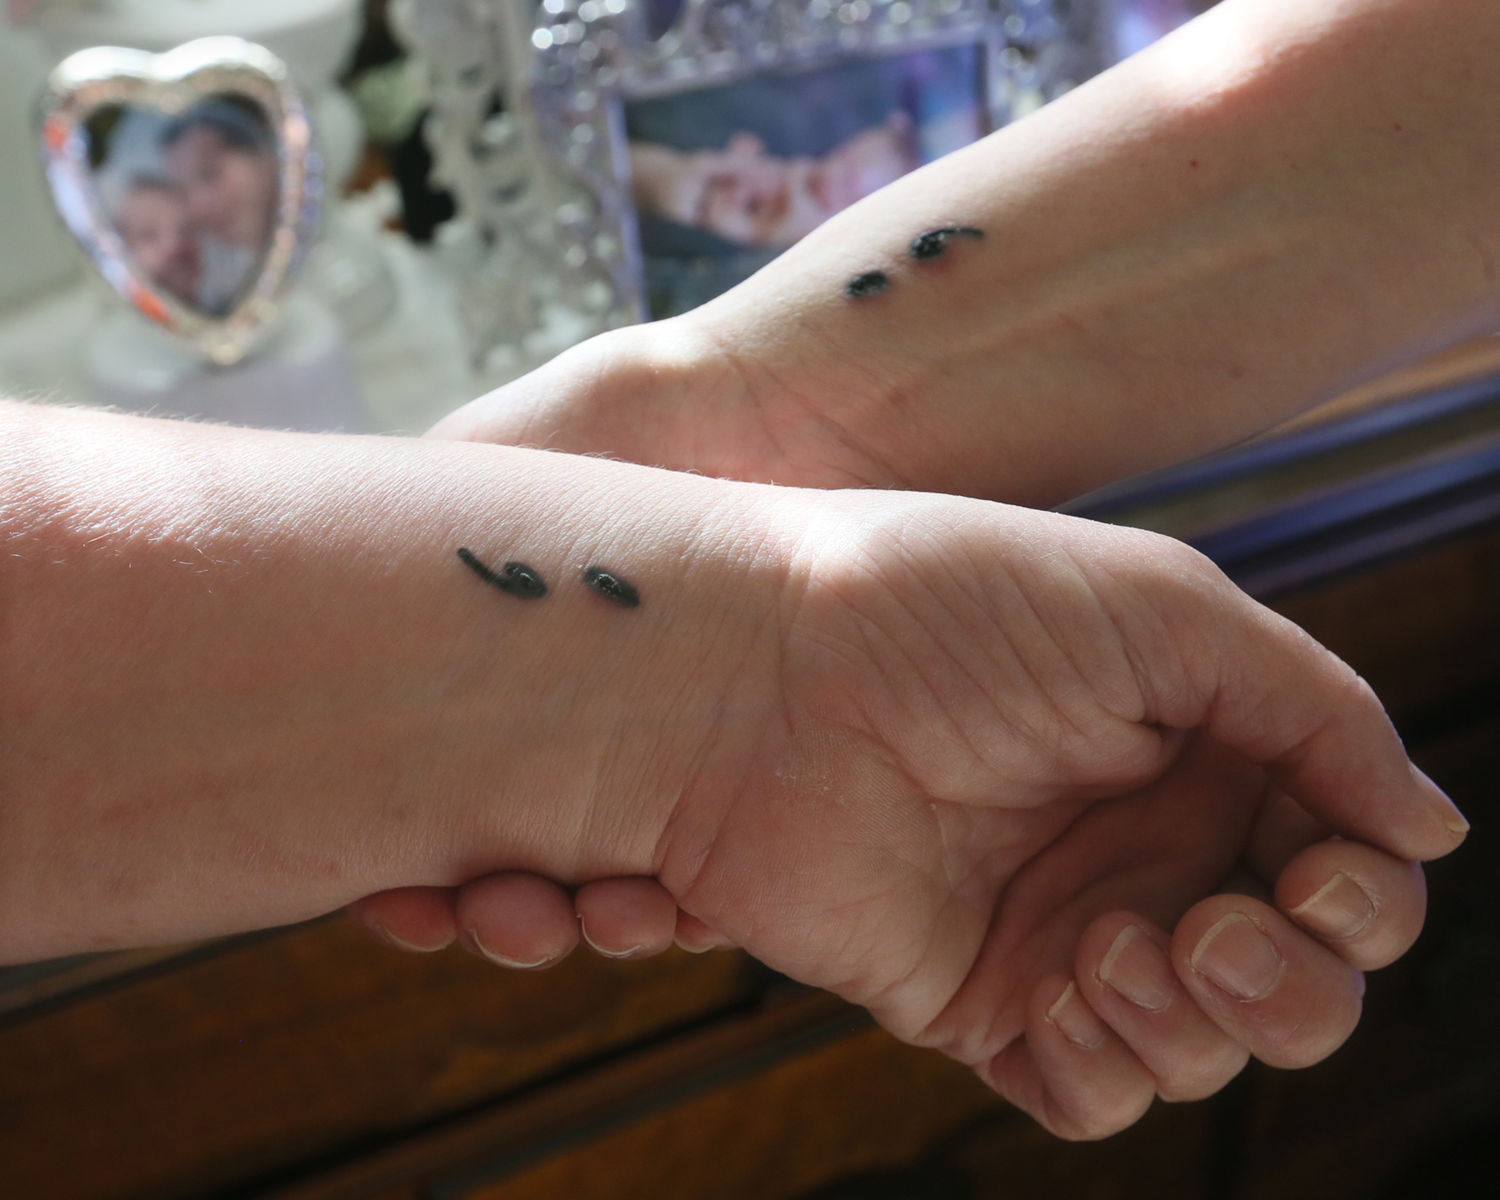 Semicolon tattoos; – what they mean and why they're trending